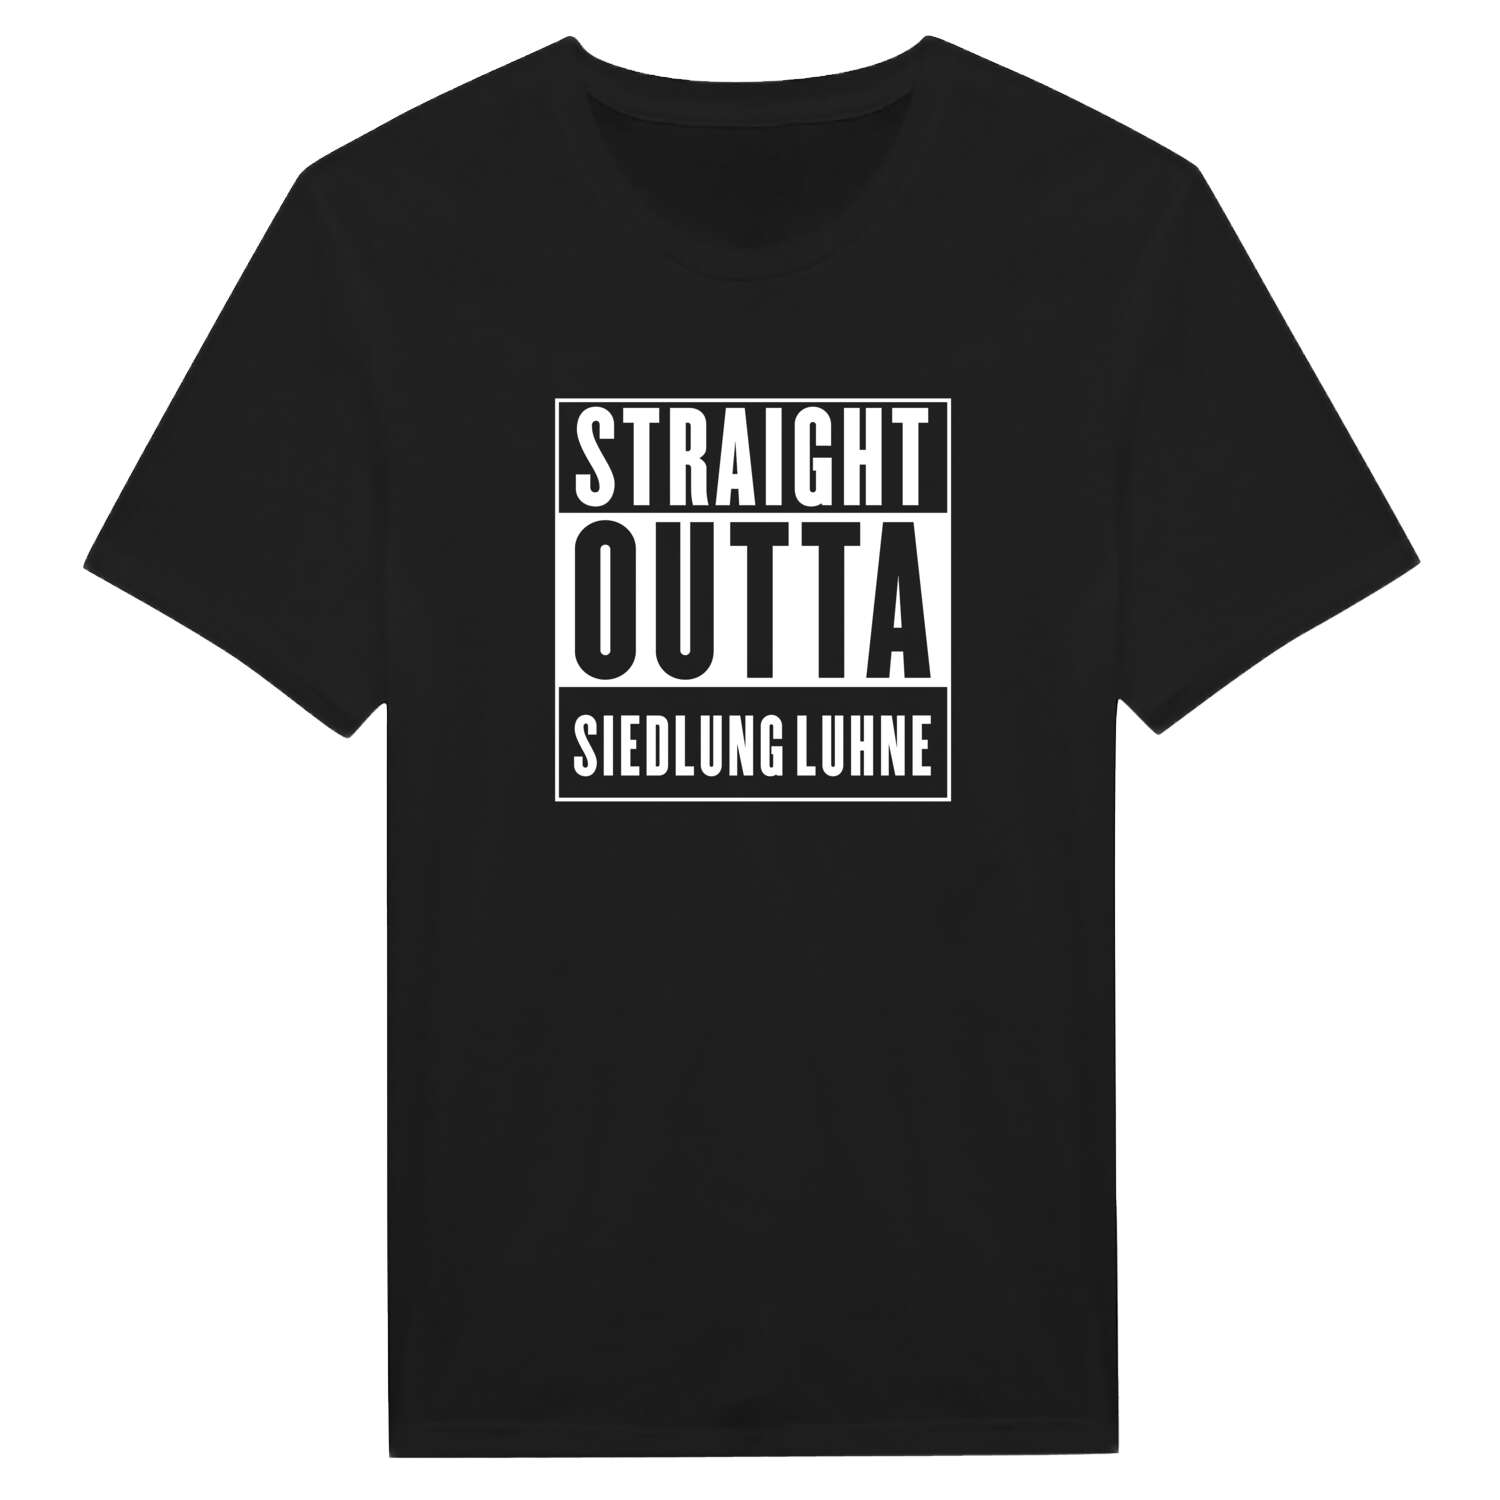 Siedlung Luhne T-Shirt »Straight Outta«